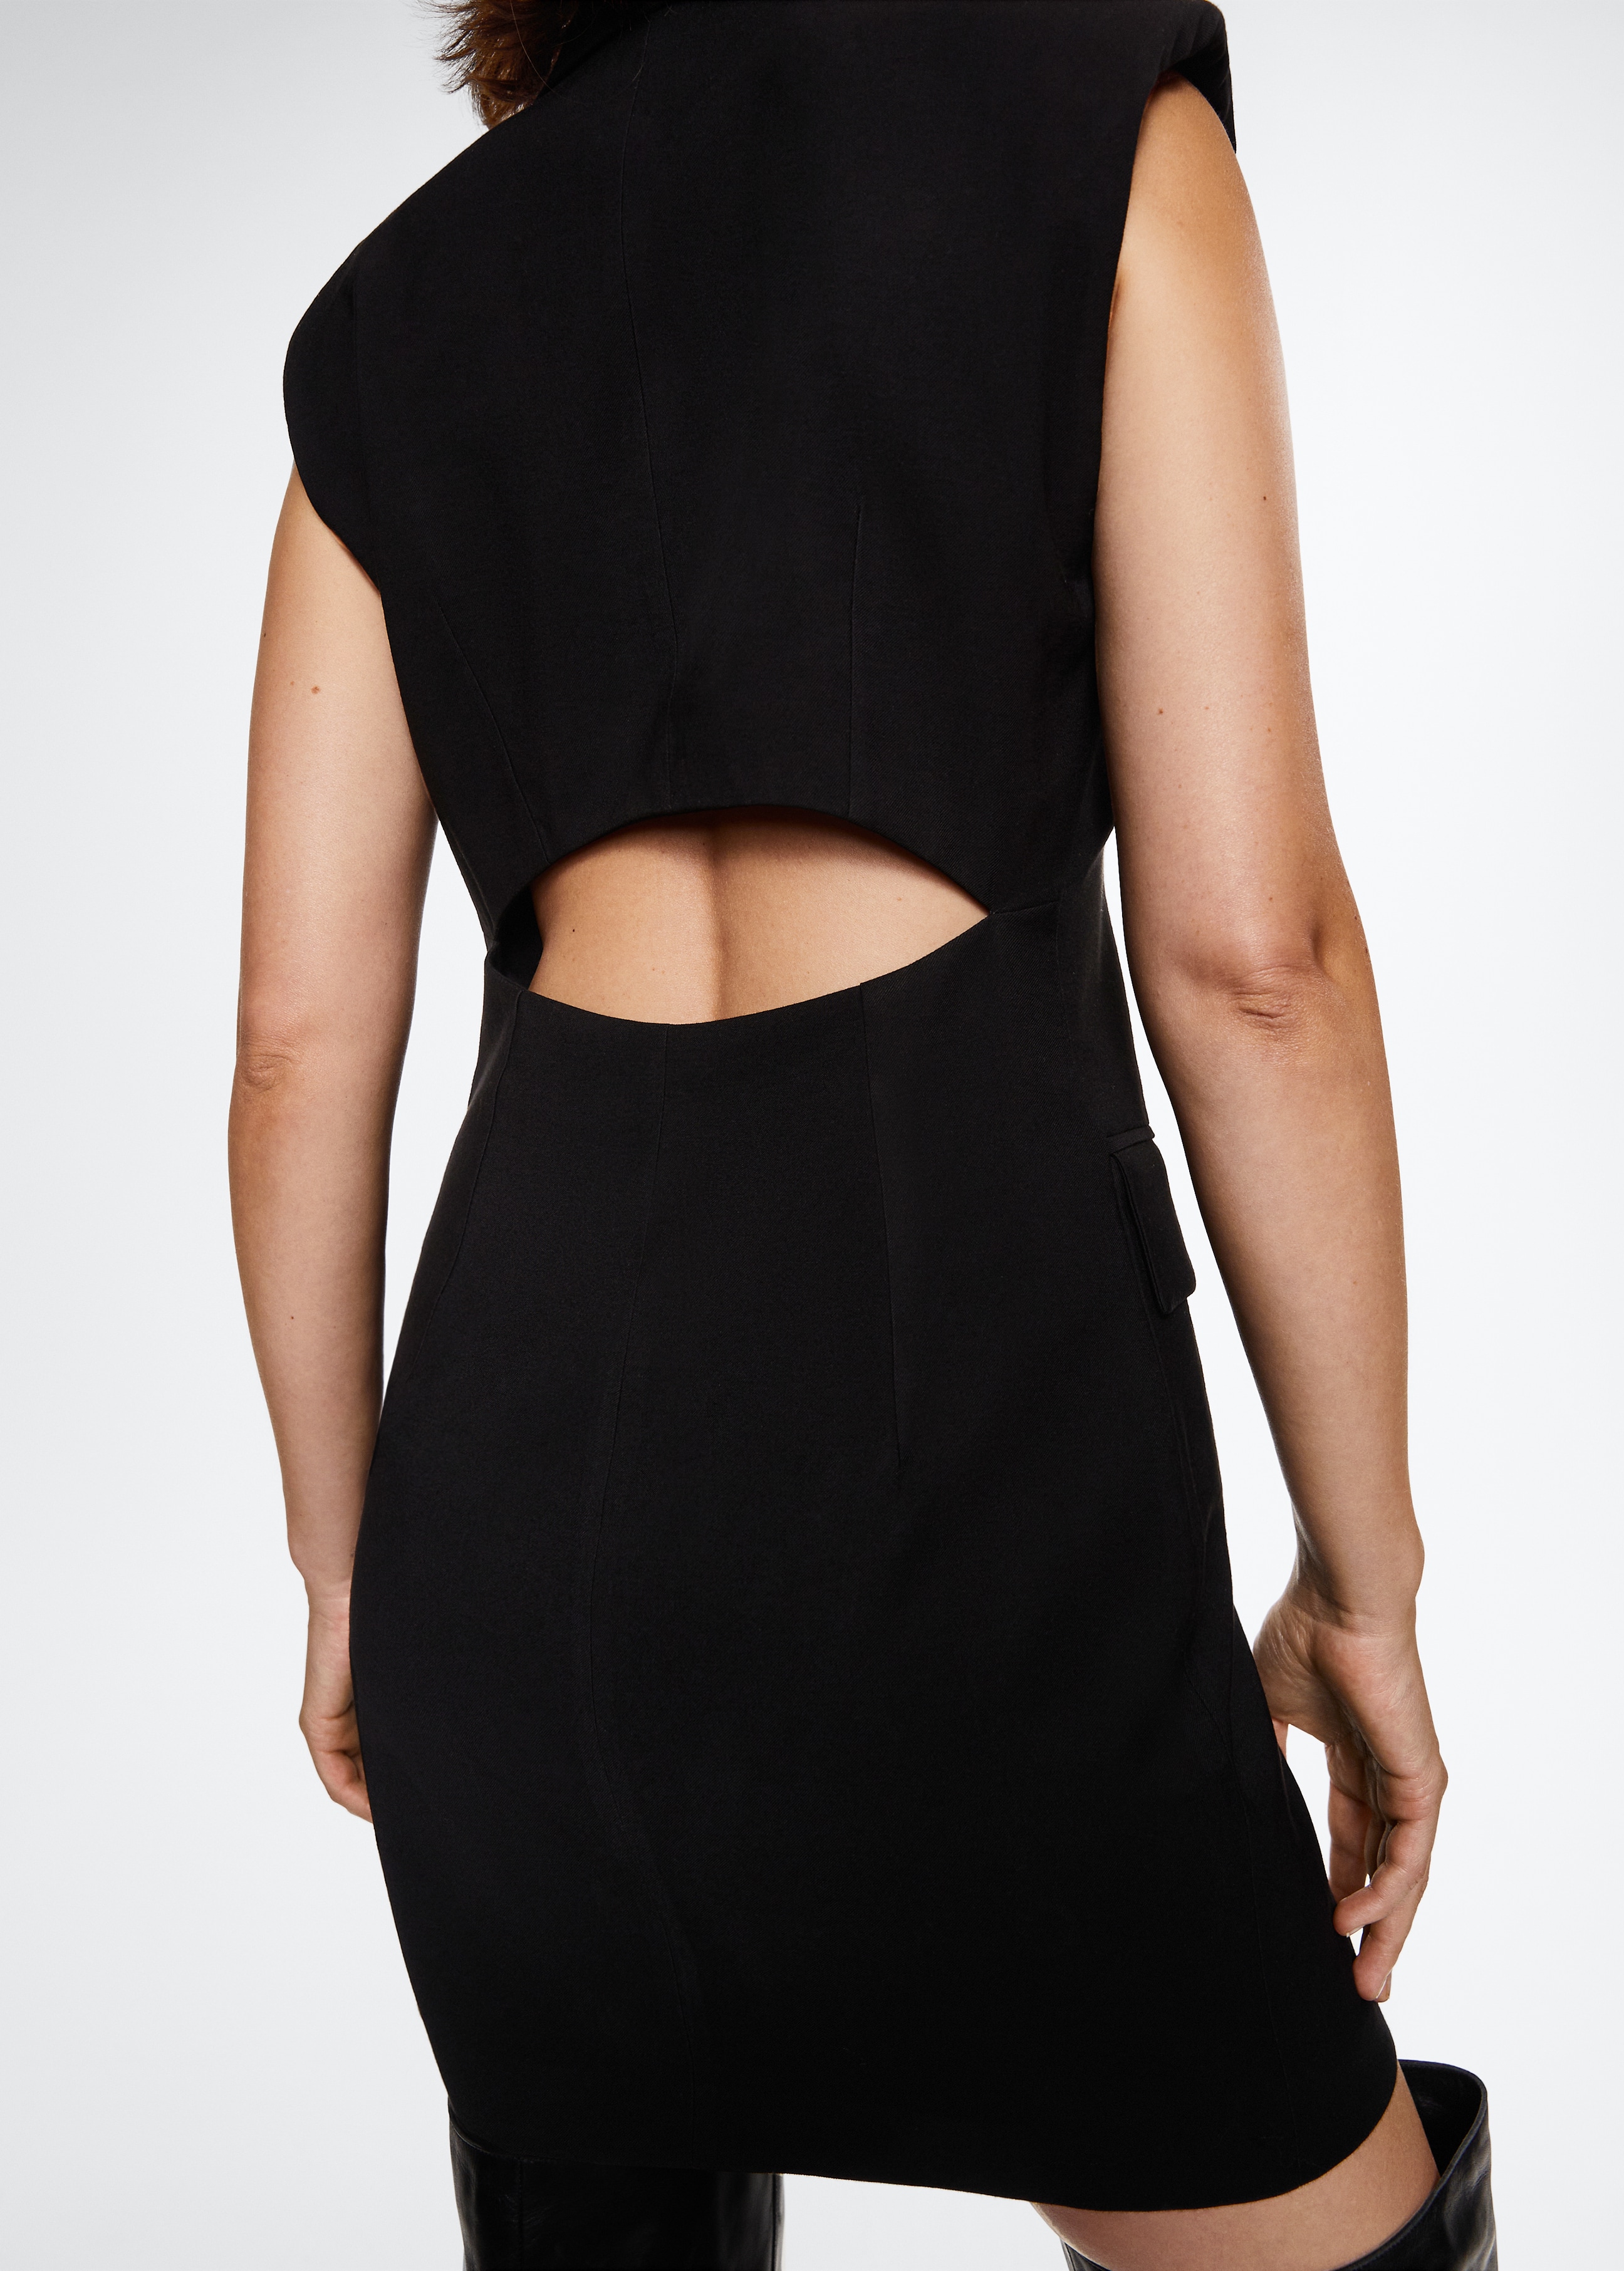 Cut-out back dress - Details of the article 6